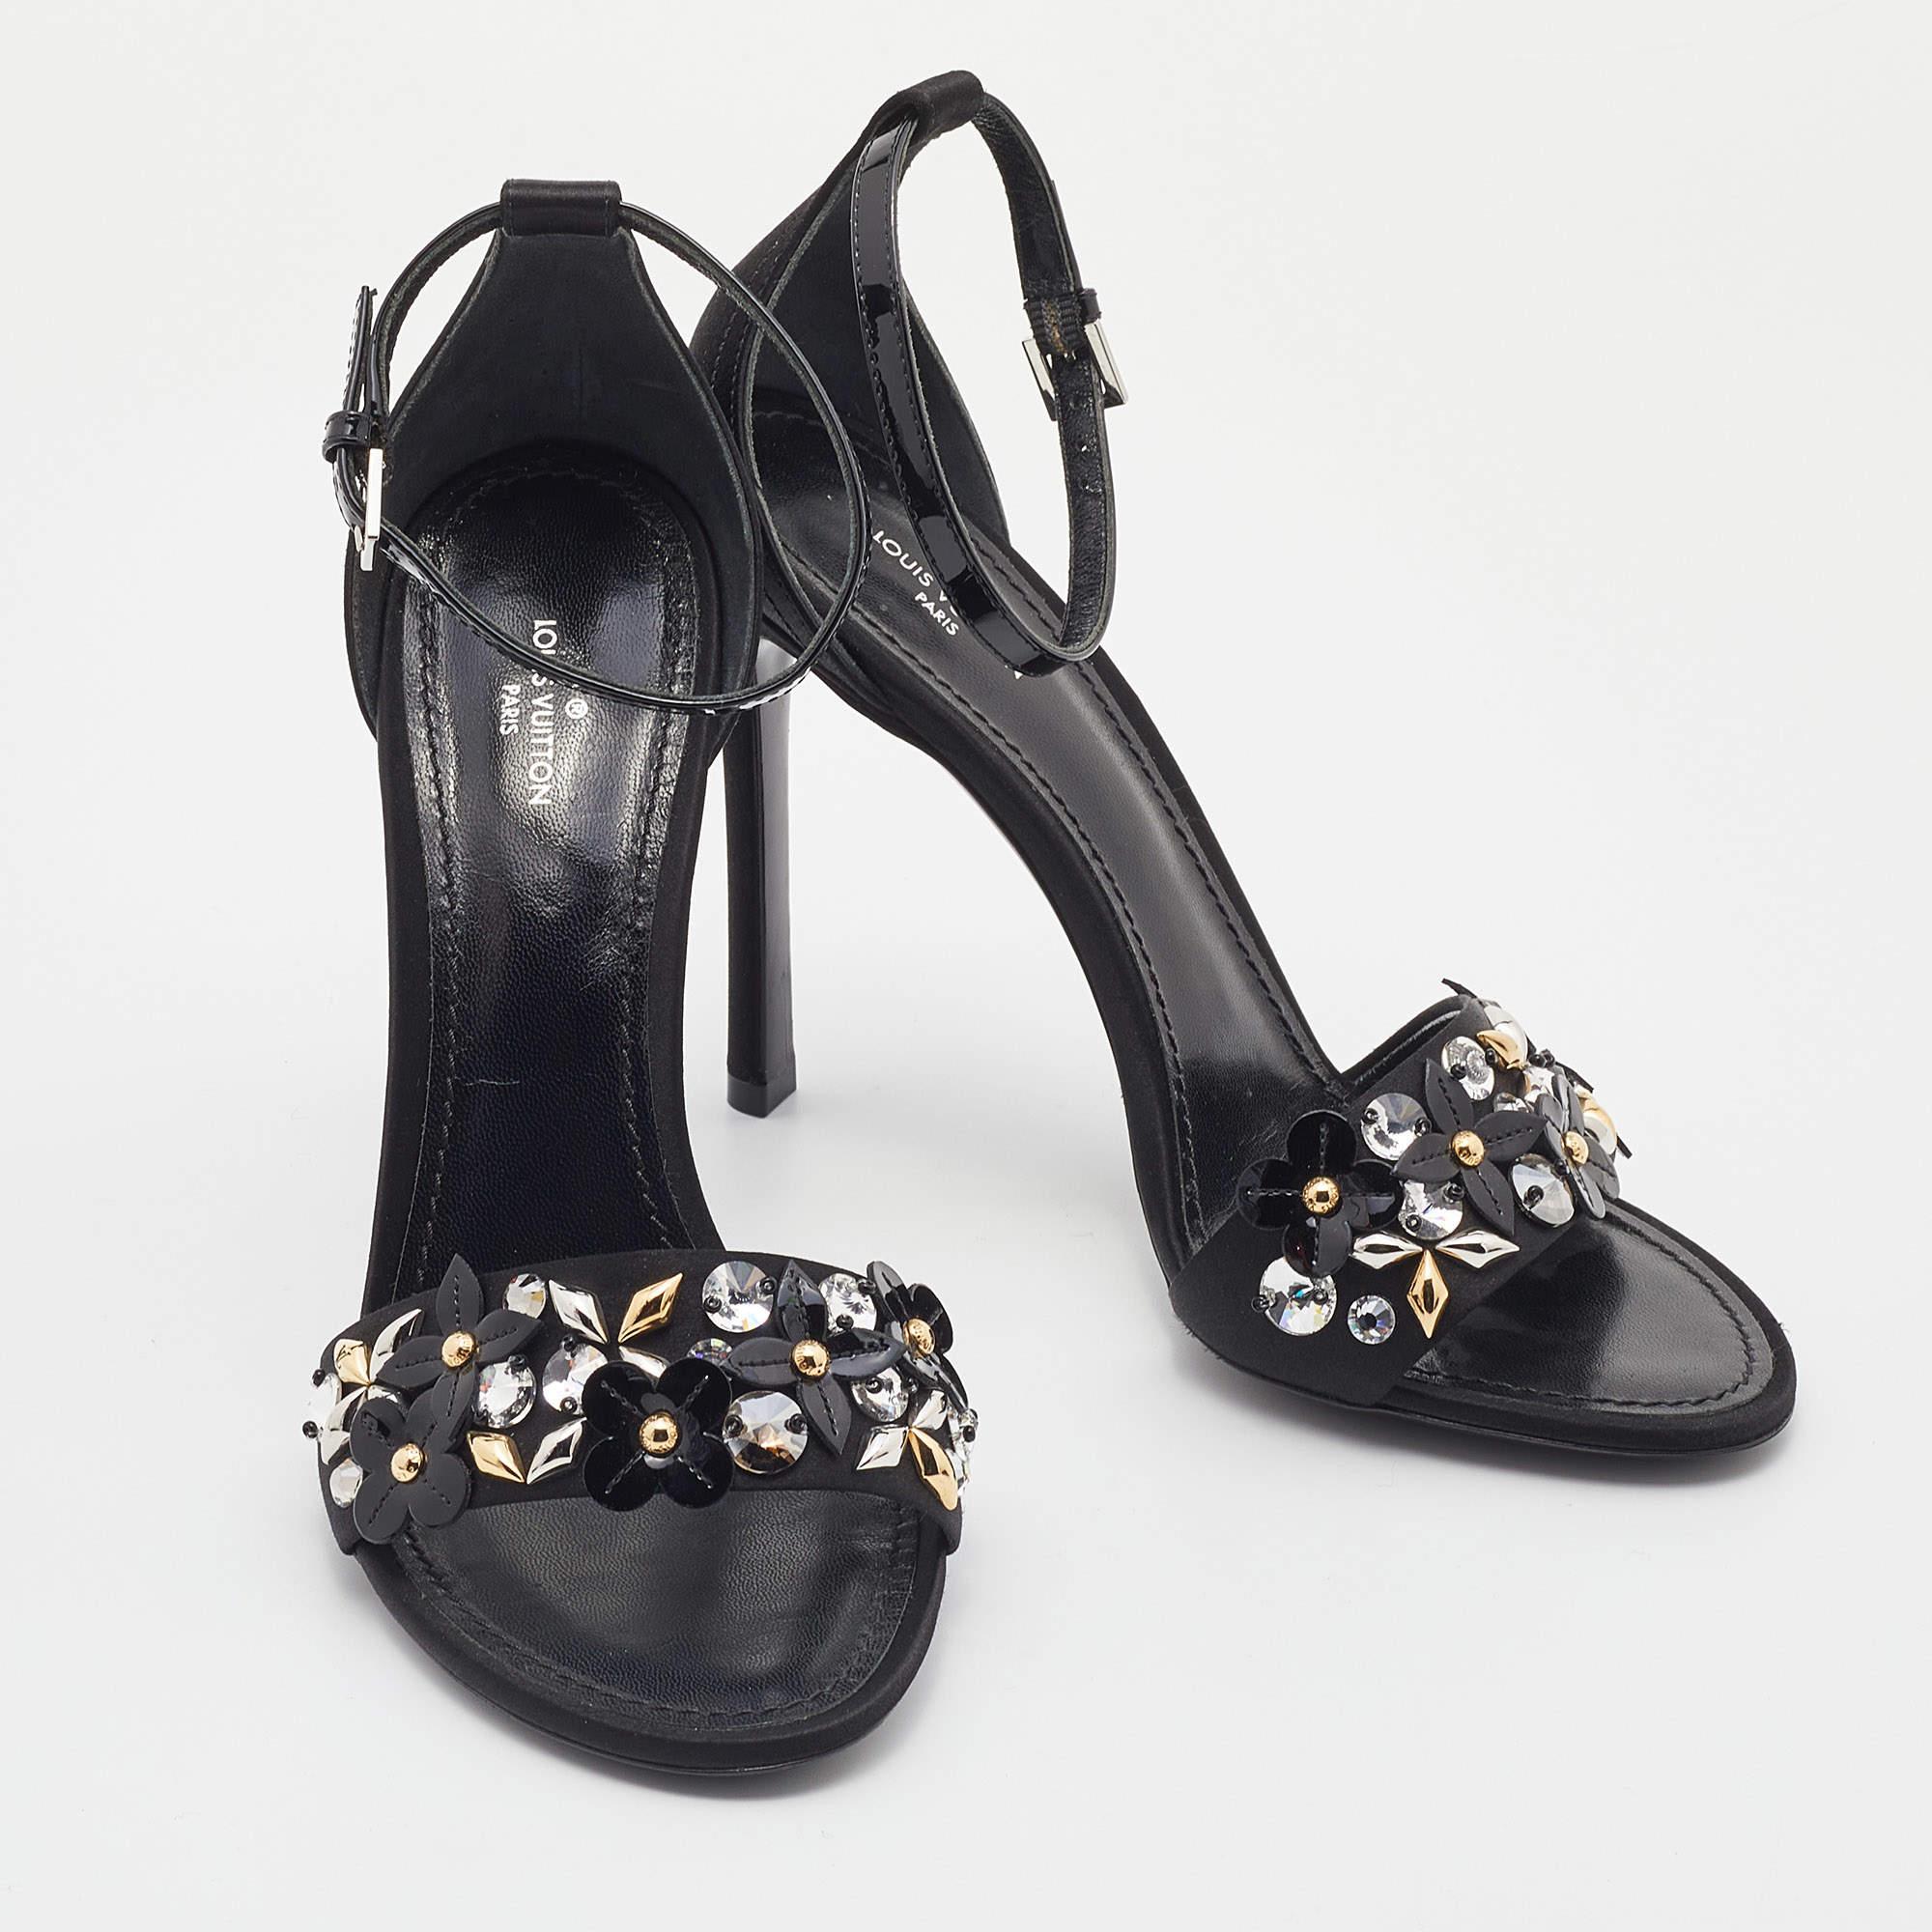 These sandals from Louis Vuitton will lend a stylish and glamorous edge to your feet. This beautiful pair is made of satin as well patent leather and added with embellished straps, buckled ankle closure, and 11.5 cm heels.

